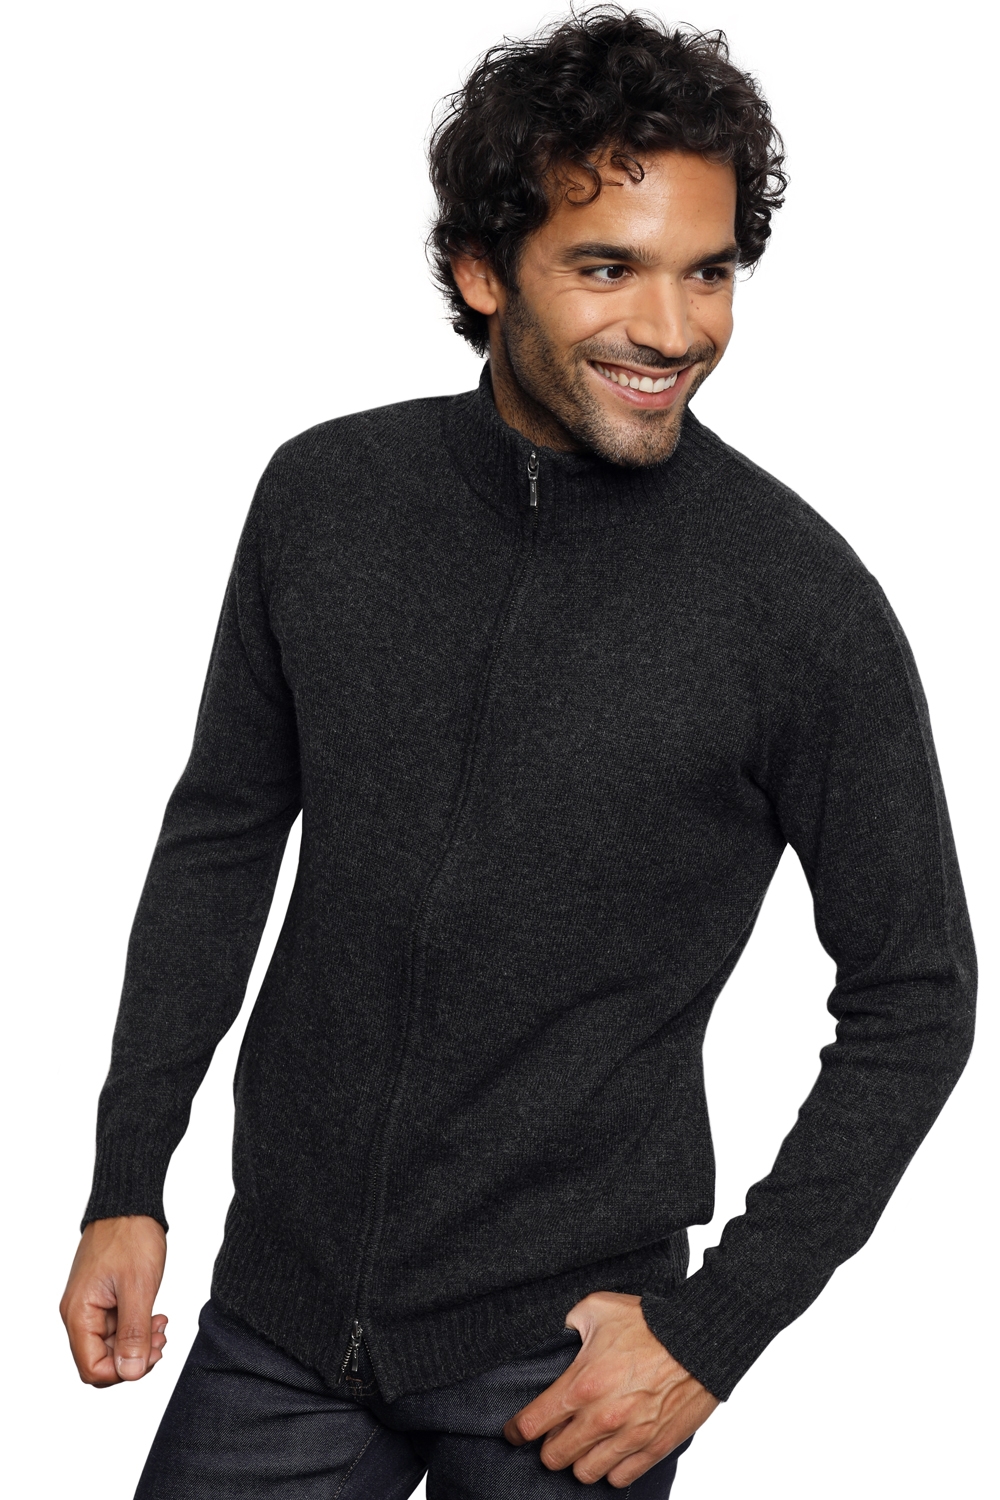 Chameau pull homme zip capuche clyde anthracite 2xl